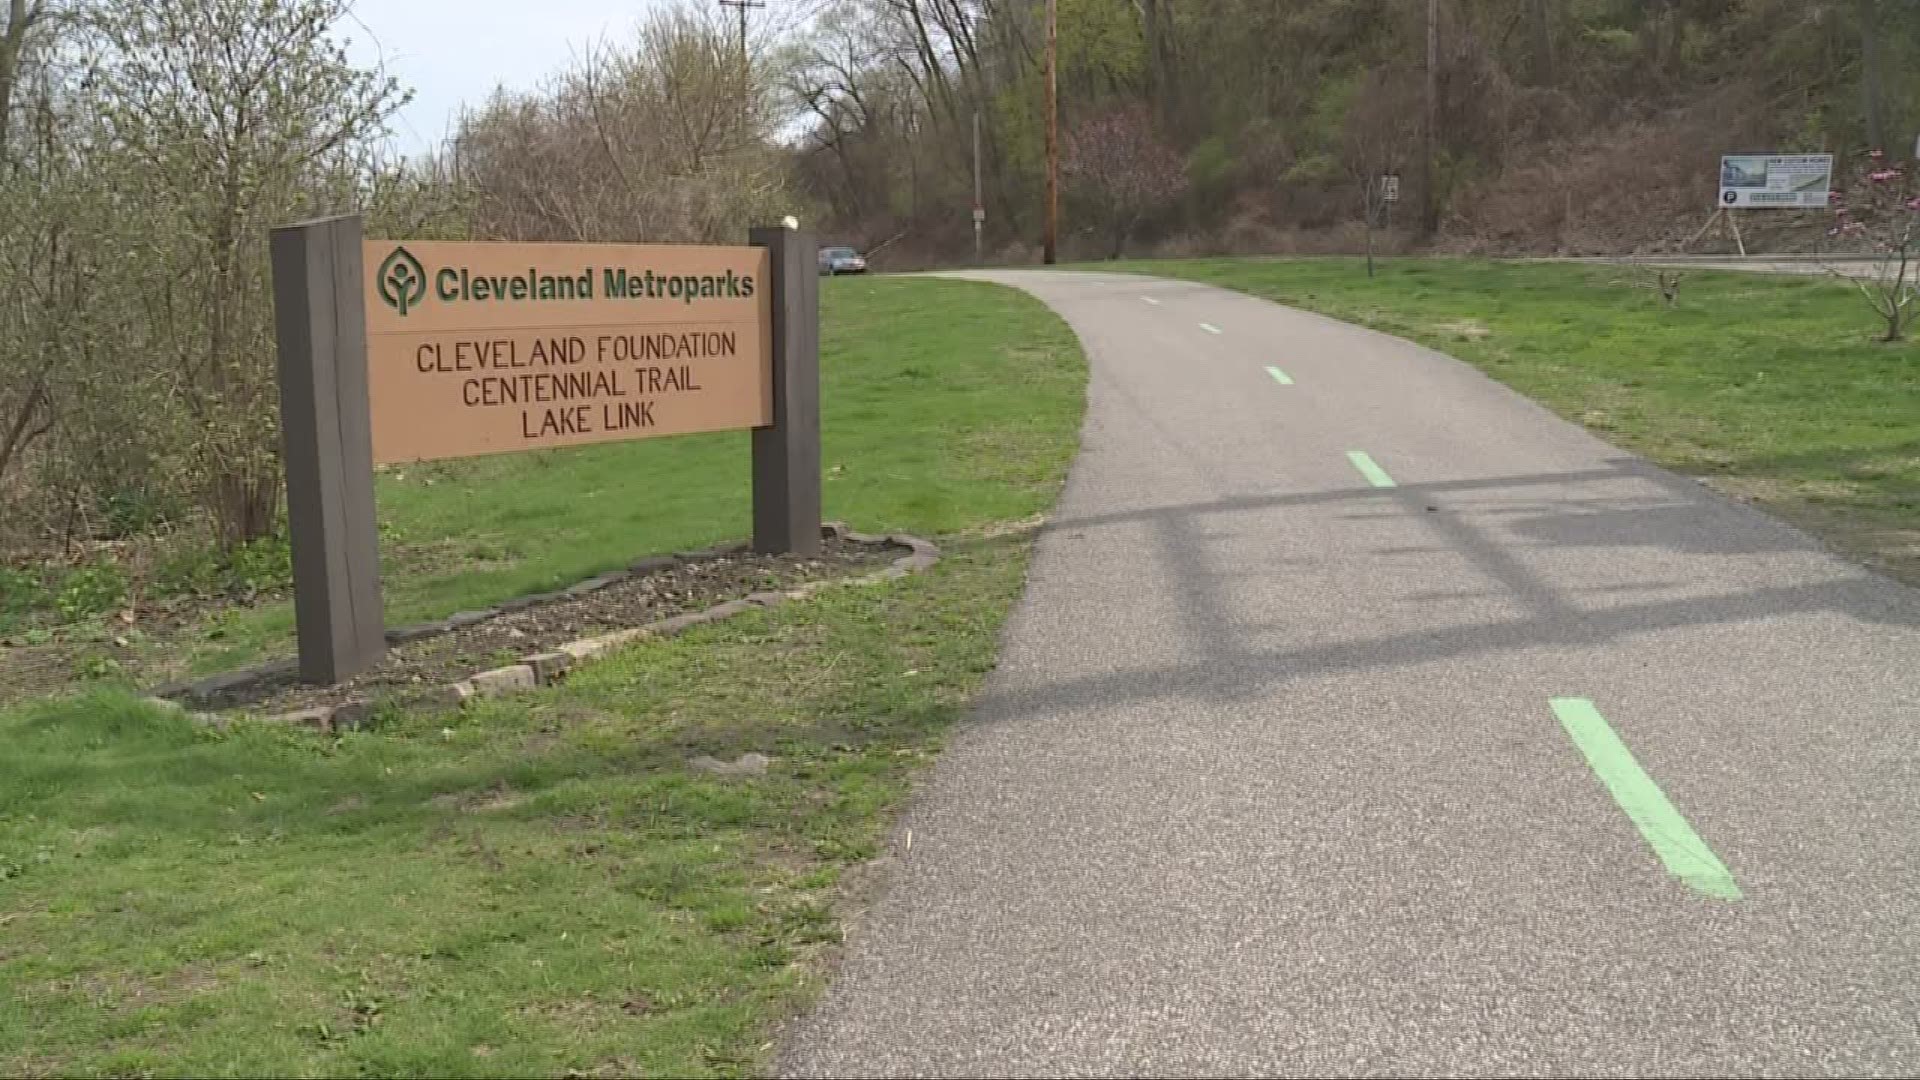 Ground stability issues on Cleveland Metroparks Lake Link trail